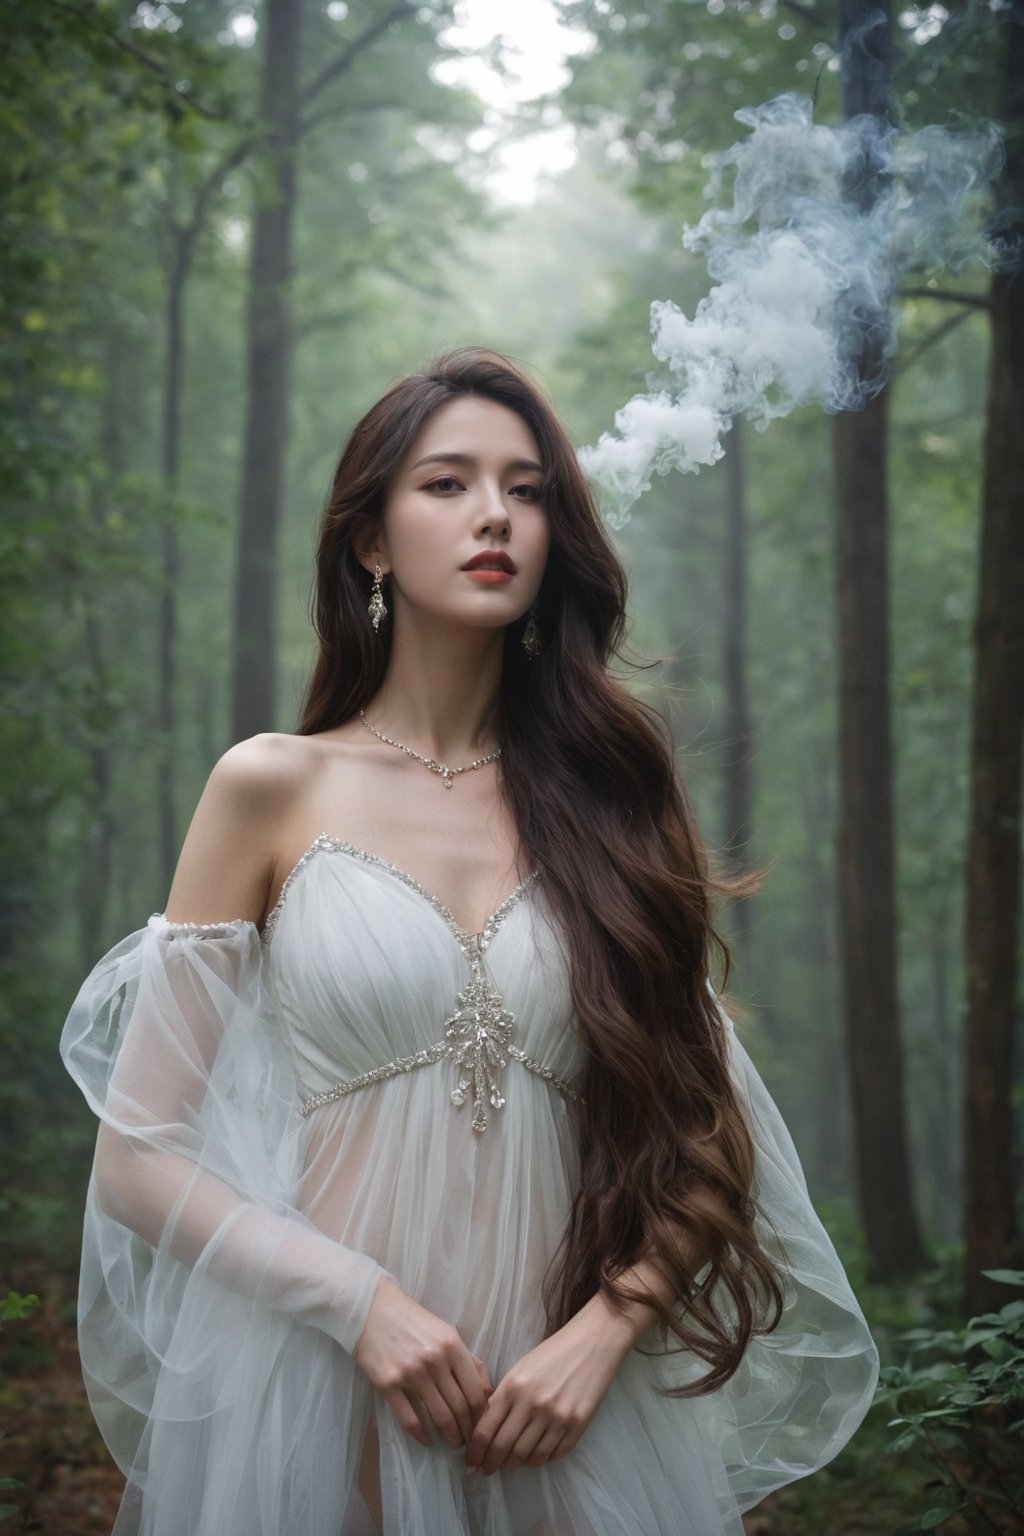 sweater, hubg_beauty_girl,perfect hands, Exquisite features,Beautiful and moving,Glamorous,Flowing hair,Smoke,mist surrounds the attractive figure,hubg_jsnh, A misty forest, A sexy figure,Long,floating hair,big hair,hair strand,Verism,chiaroscuro,cinematic lighting,depth of field,sparkle,reflection light,first-person view,pov,three sided view,UHD,anatomically correct,ccurate,textured skin,super detail,high details,award winning,best quality,high quality,retina,HD,16k,flat abdomen, crystal_earrings,headwear,clover_hair_ornament,jewelry_necklace,tassel,arm_garter,pendant,